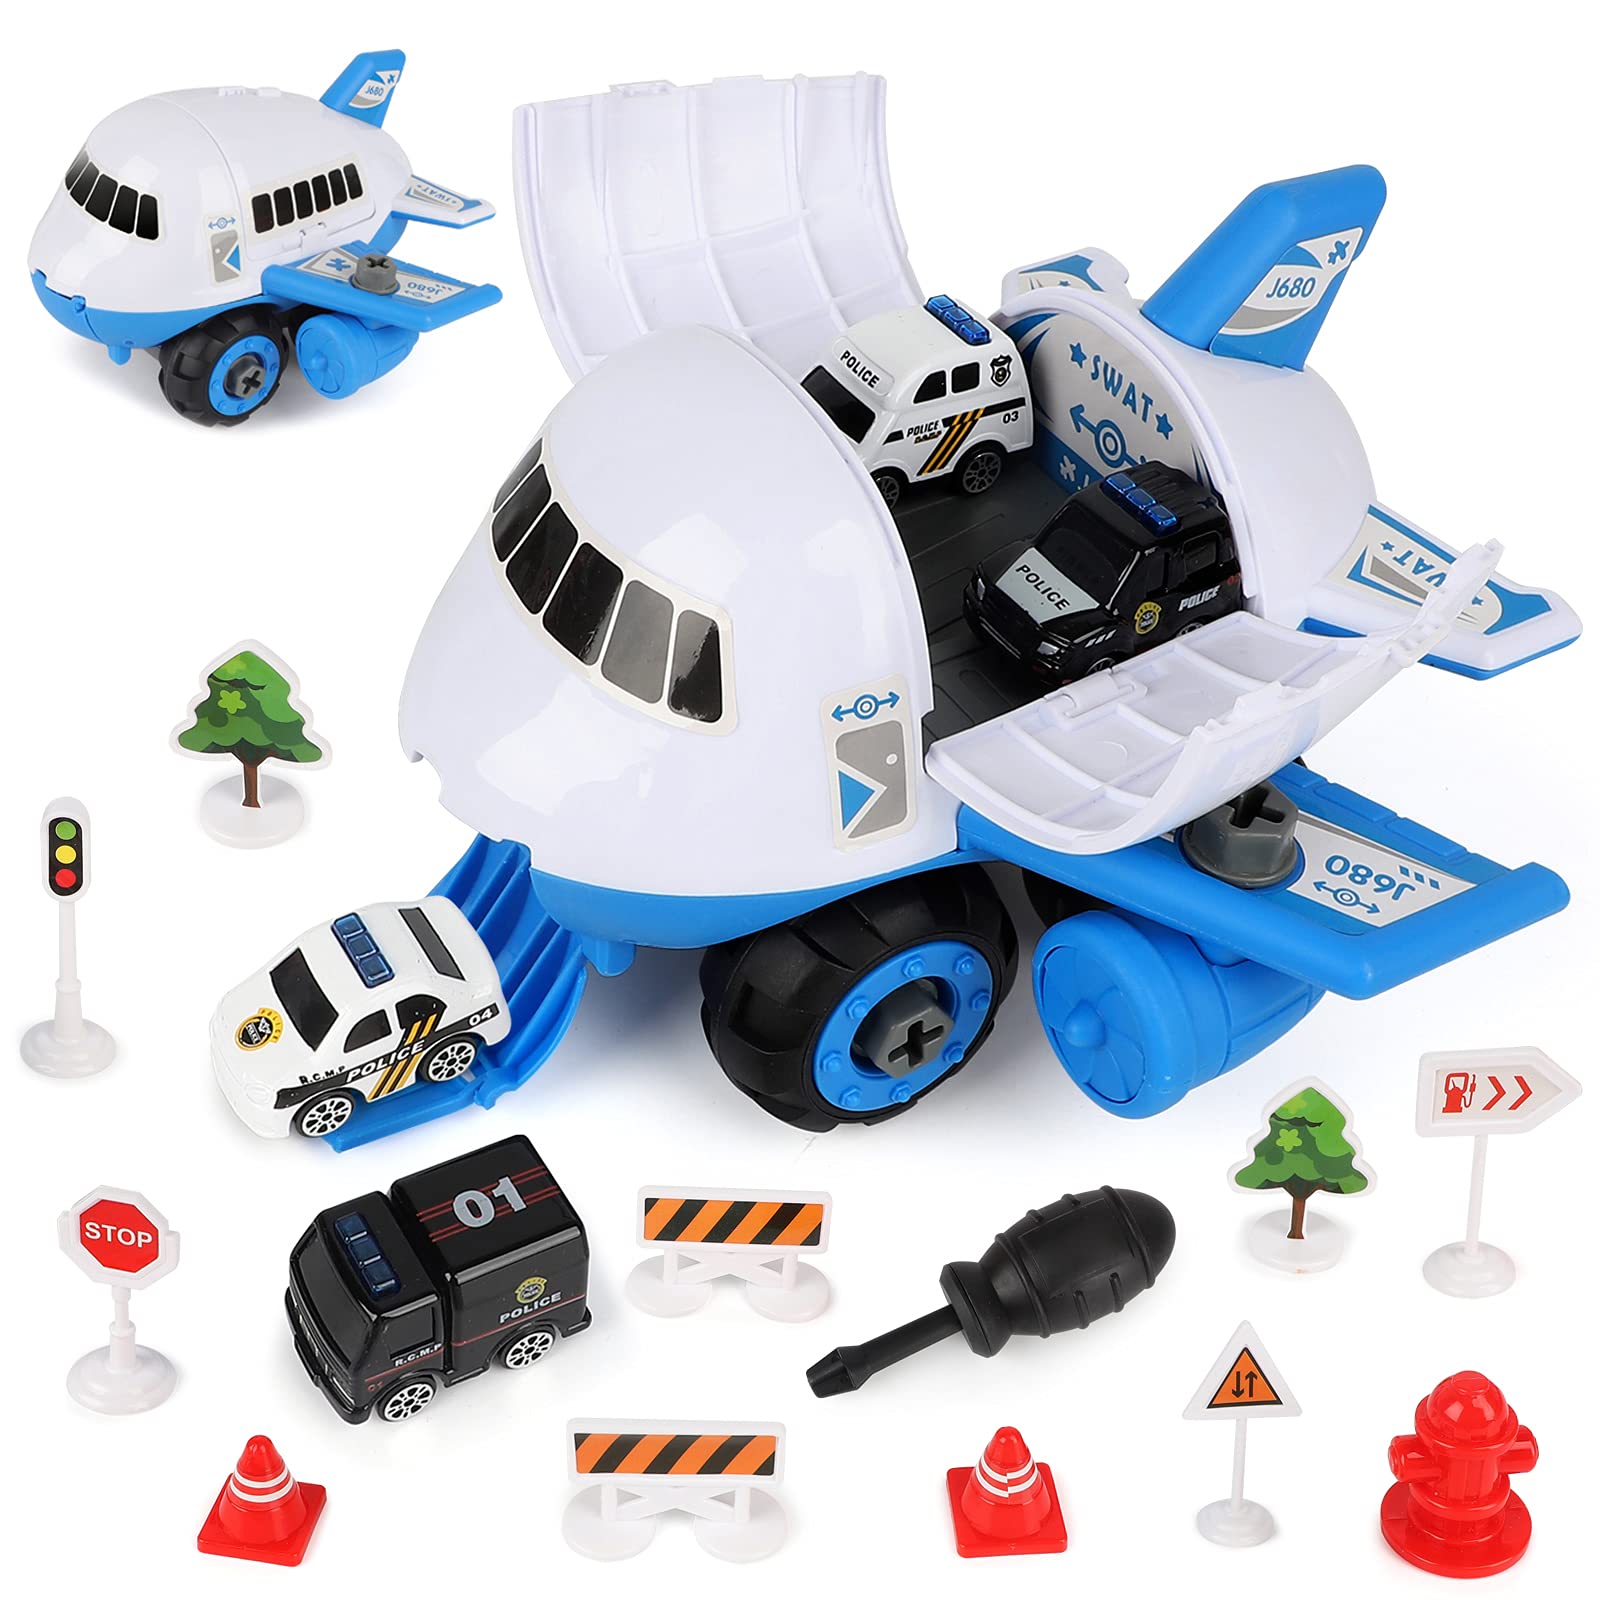 2021 New Style World Of Wooden Toys - BeebeeRun Transport Cargo Airplane Toys -Take Apart Cargo Plane Toys Set with Mini Police Cars Toy for 3 4 5+ Year Old Boys Girls, Assembly Toy Gifts for Todd...